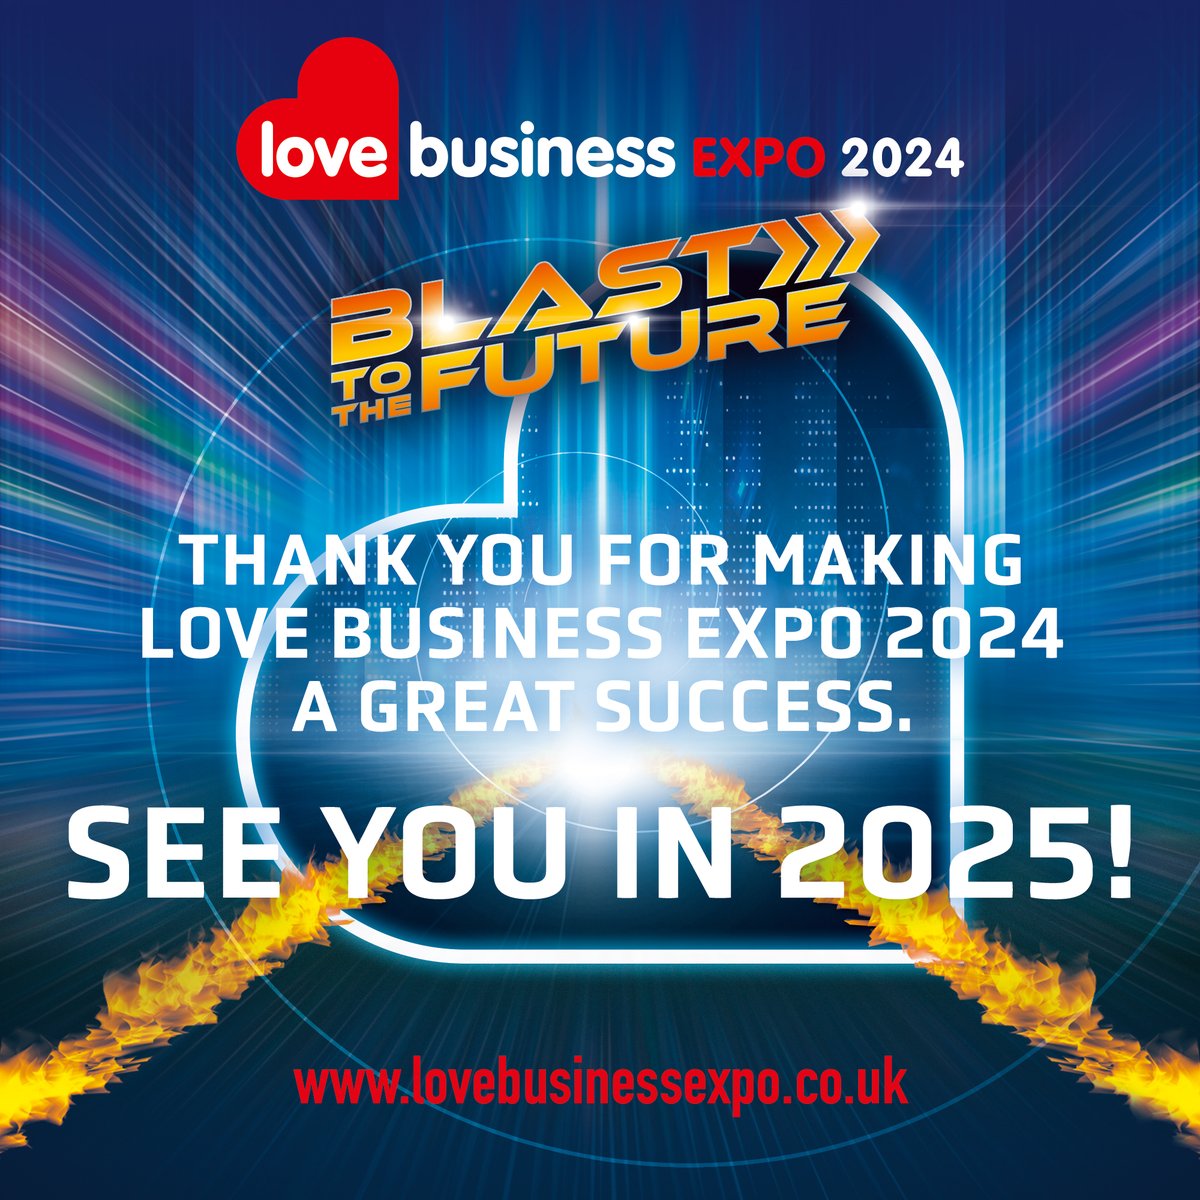 Thank You for making Love Business EXPO 2024 a great success. SEE YOU IN 2025! lovebusinessexpo.co.uk #LoveBusinessEXPO #love #business #event #east #midlands #eastmidlands #networking #networkingevent